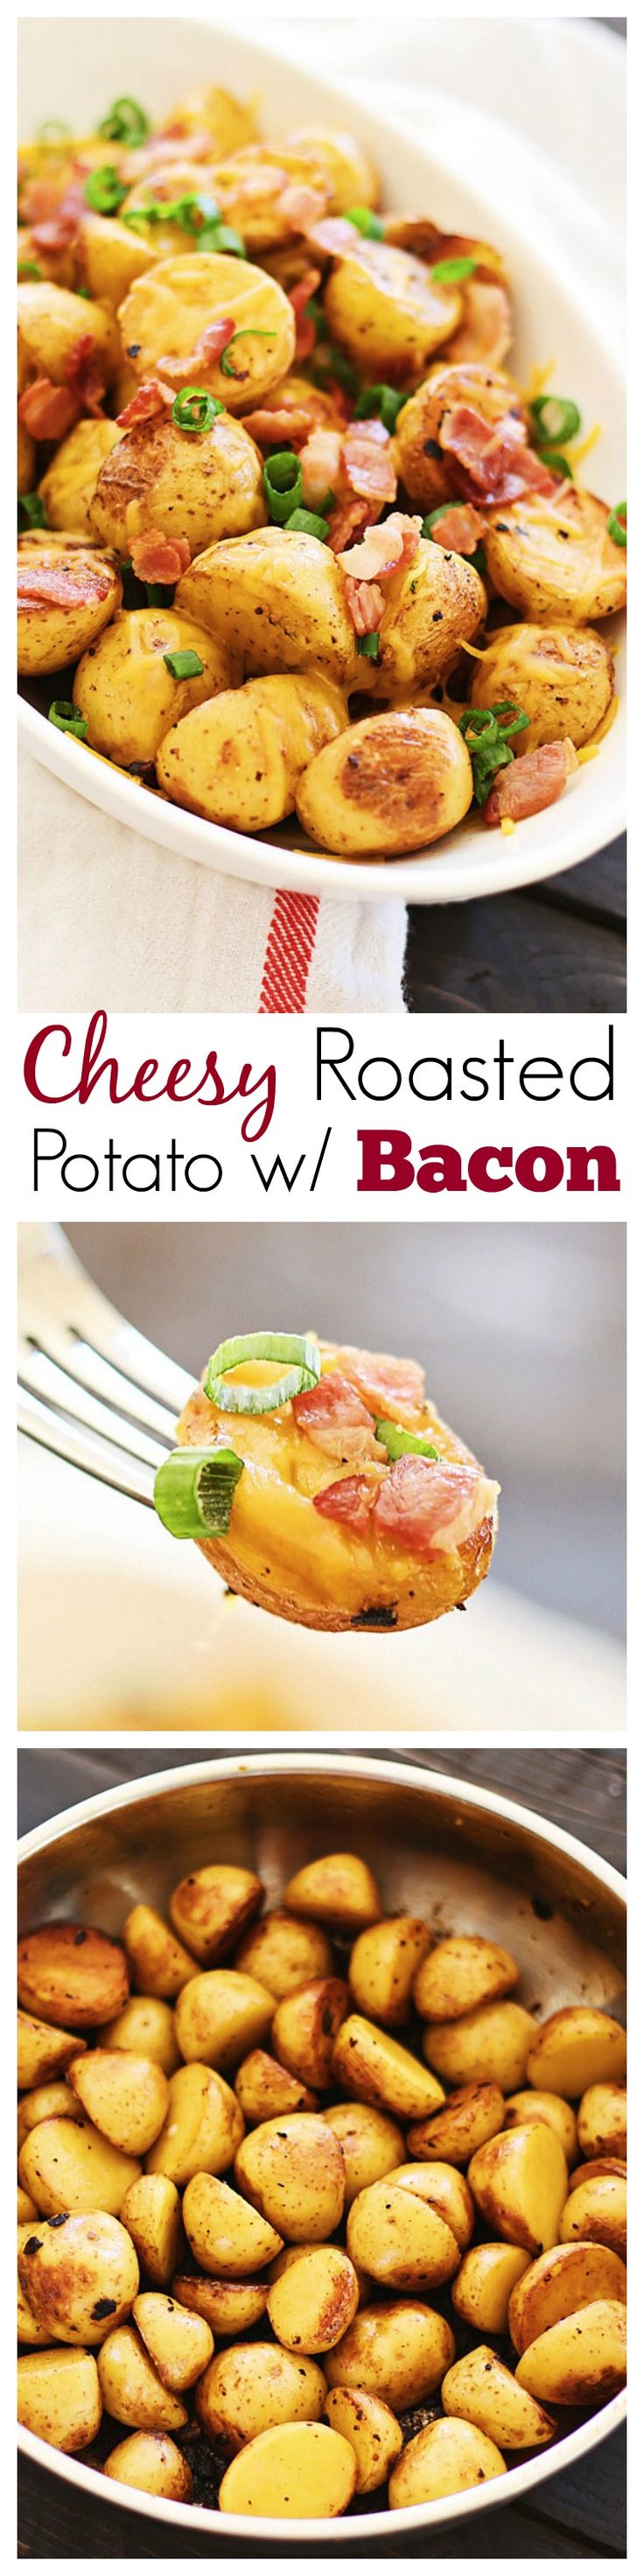 Cheesy Roasted Potatoes with Bacon – mini golden potatoes roasted with garlic, cheddar cheese and bacon. An amazing side dish for Thanksgiving | rasamalaysia.com